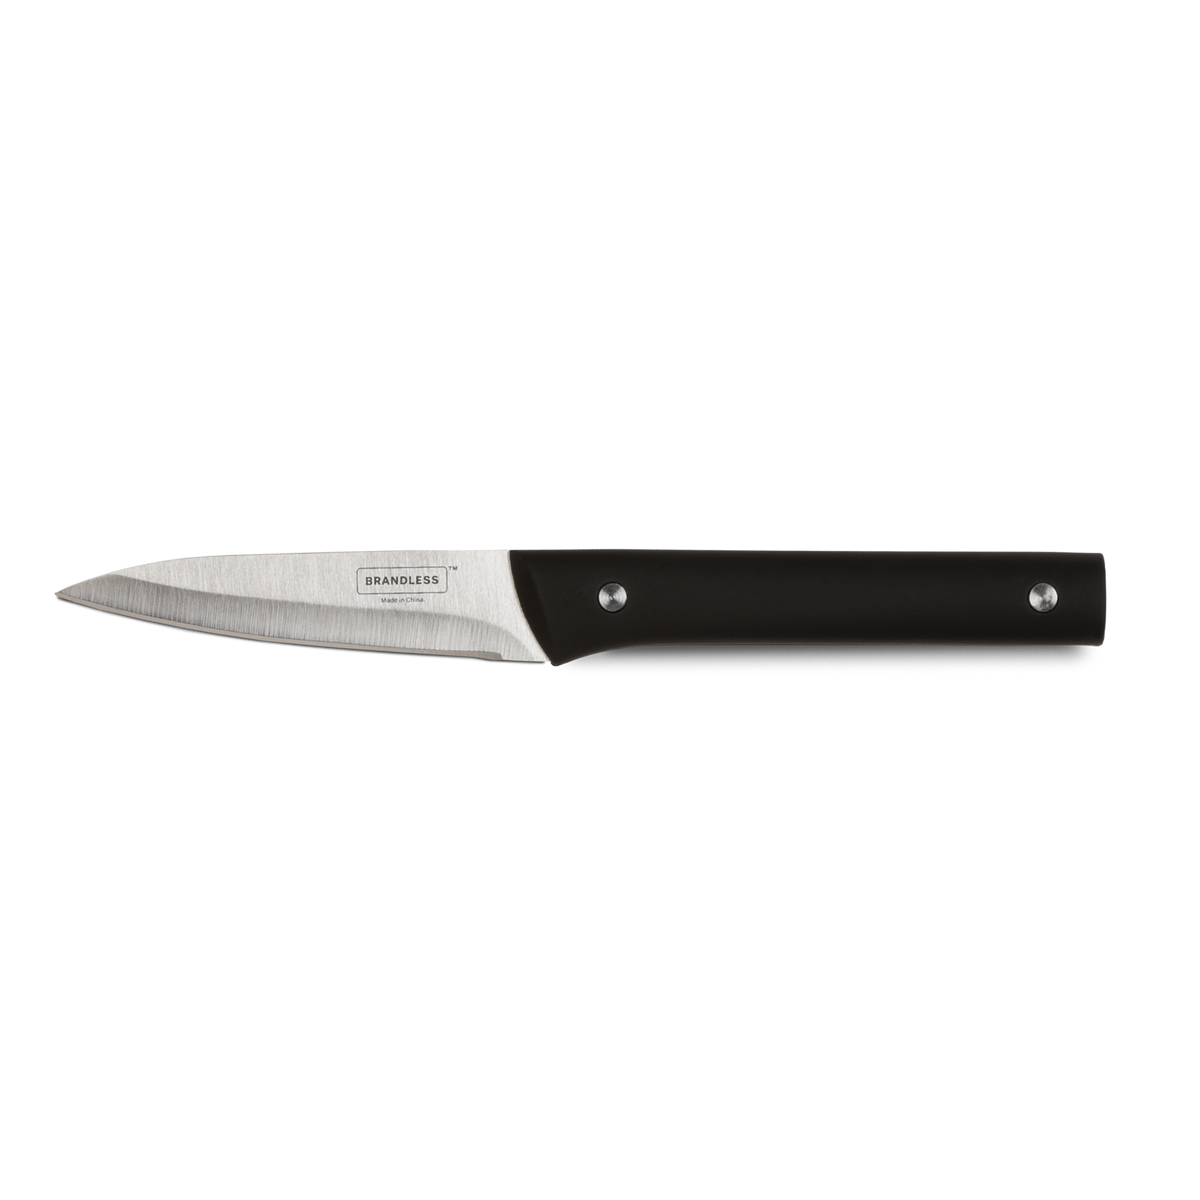 Product photo, side view, paring knife.